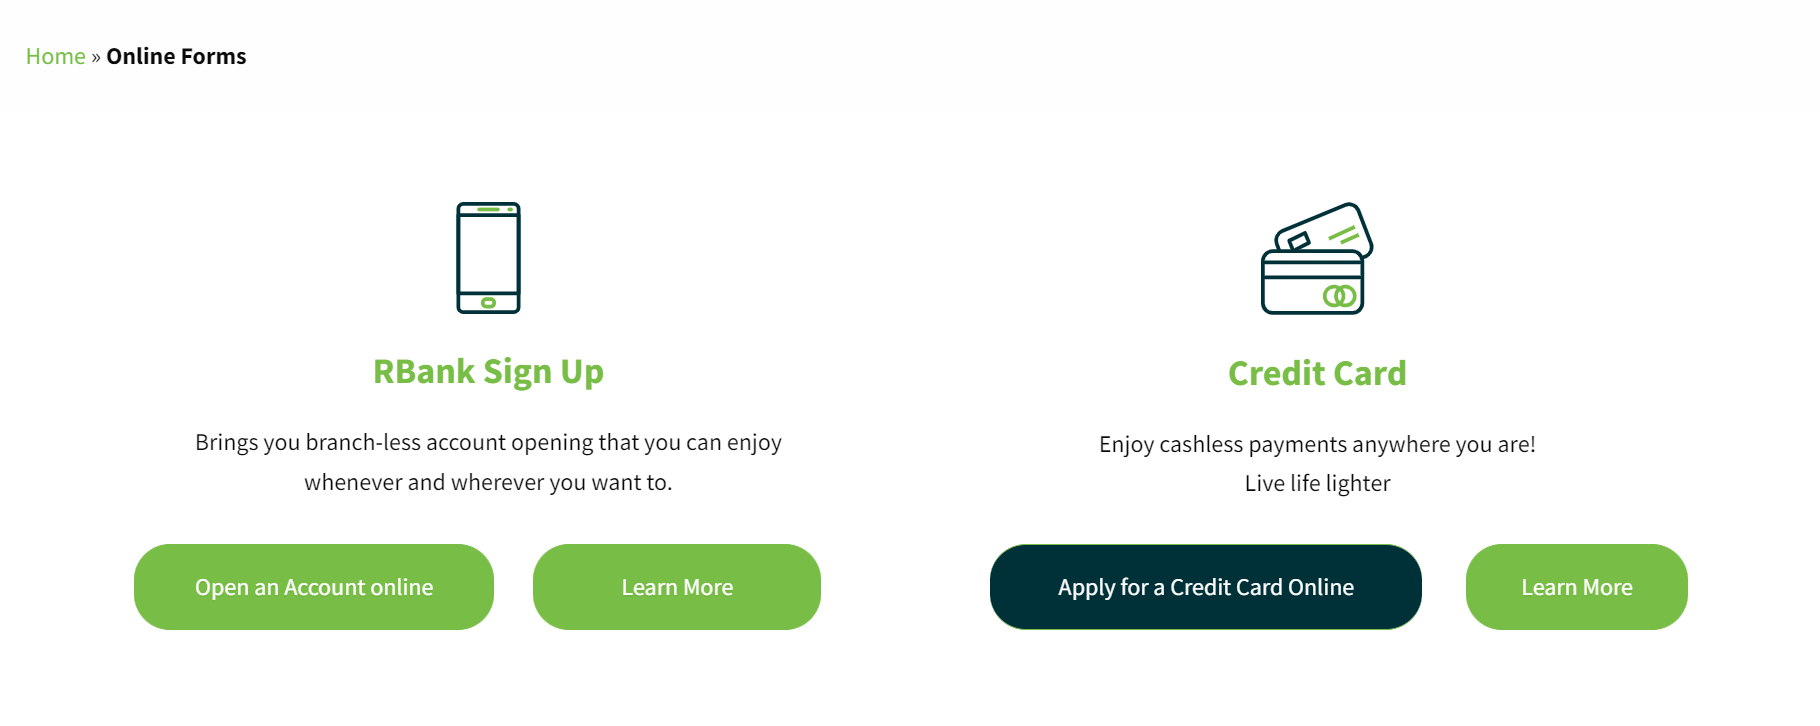 robinsons credit card application - online